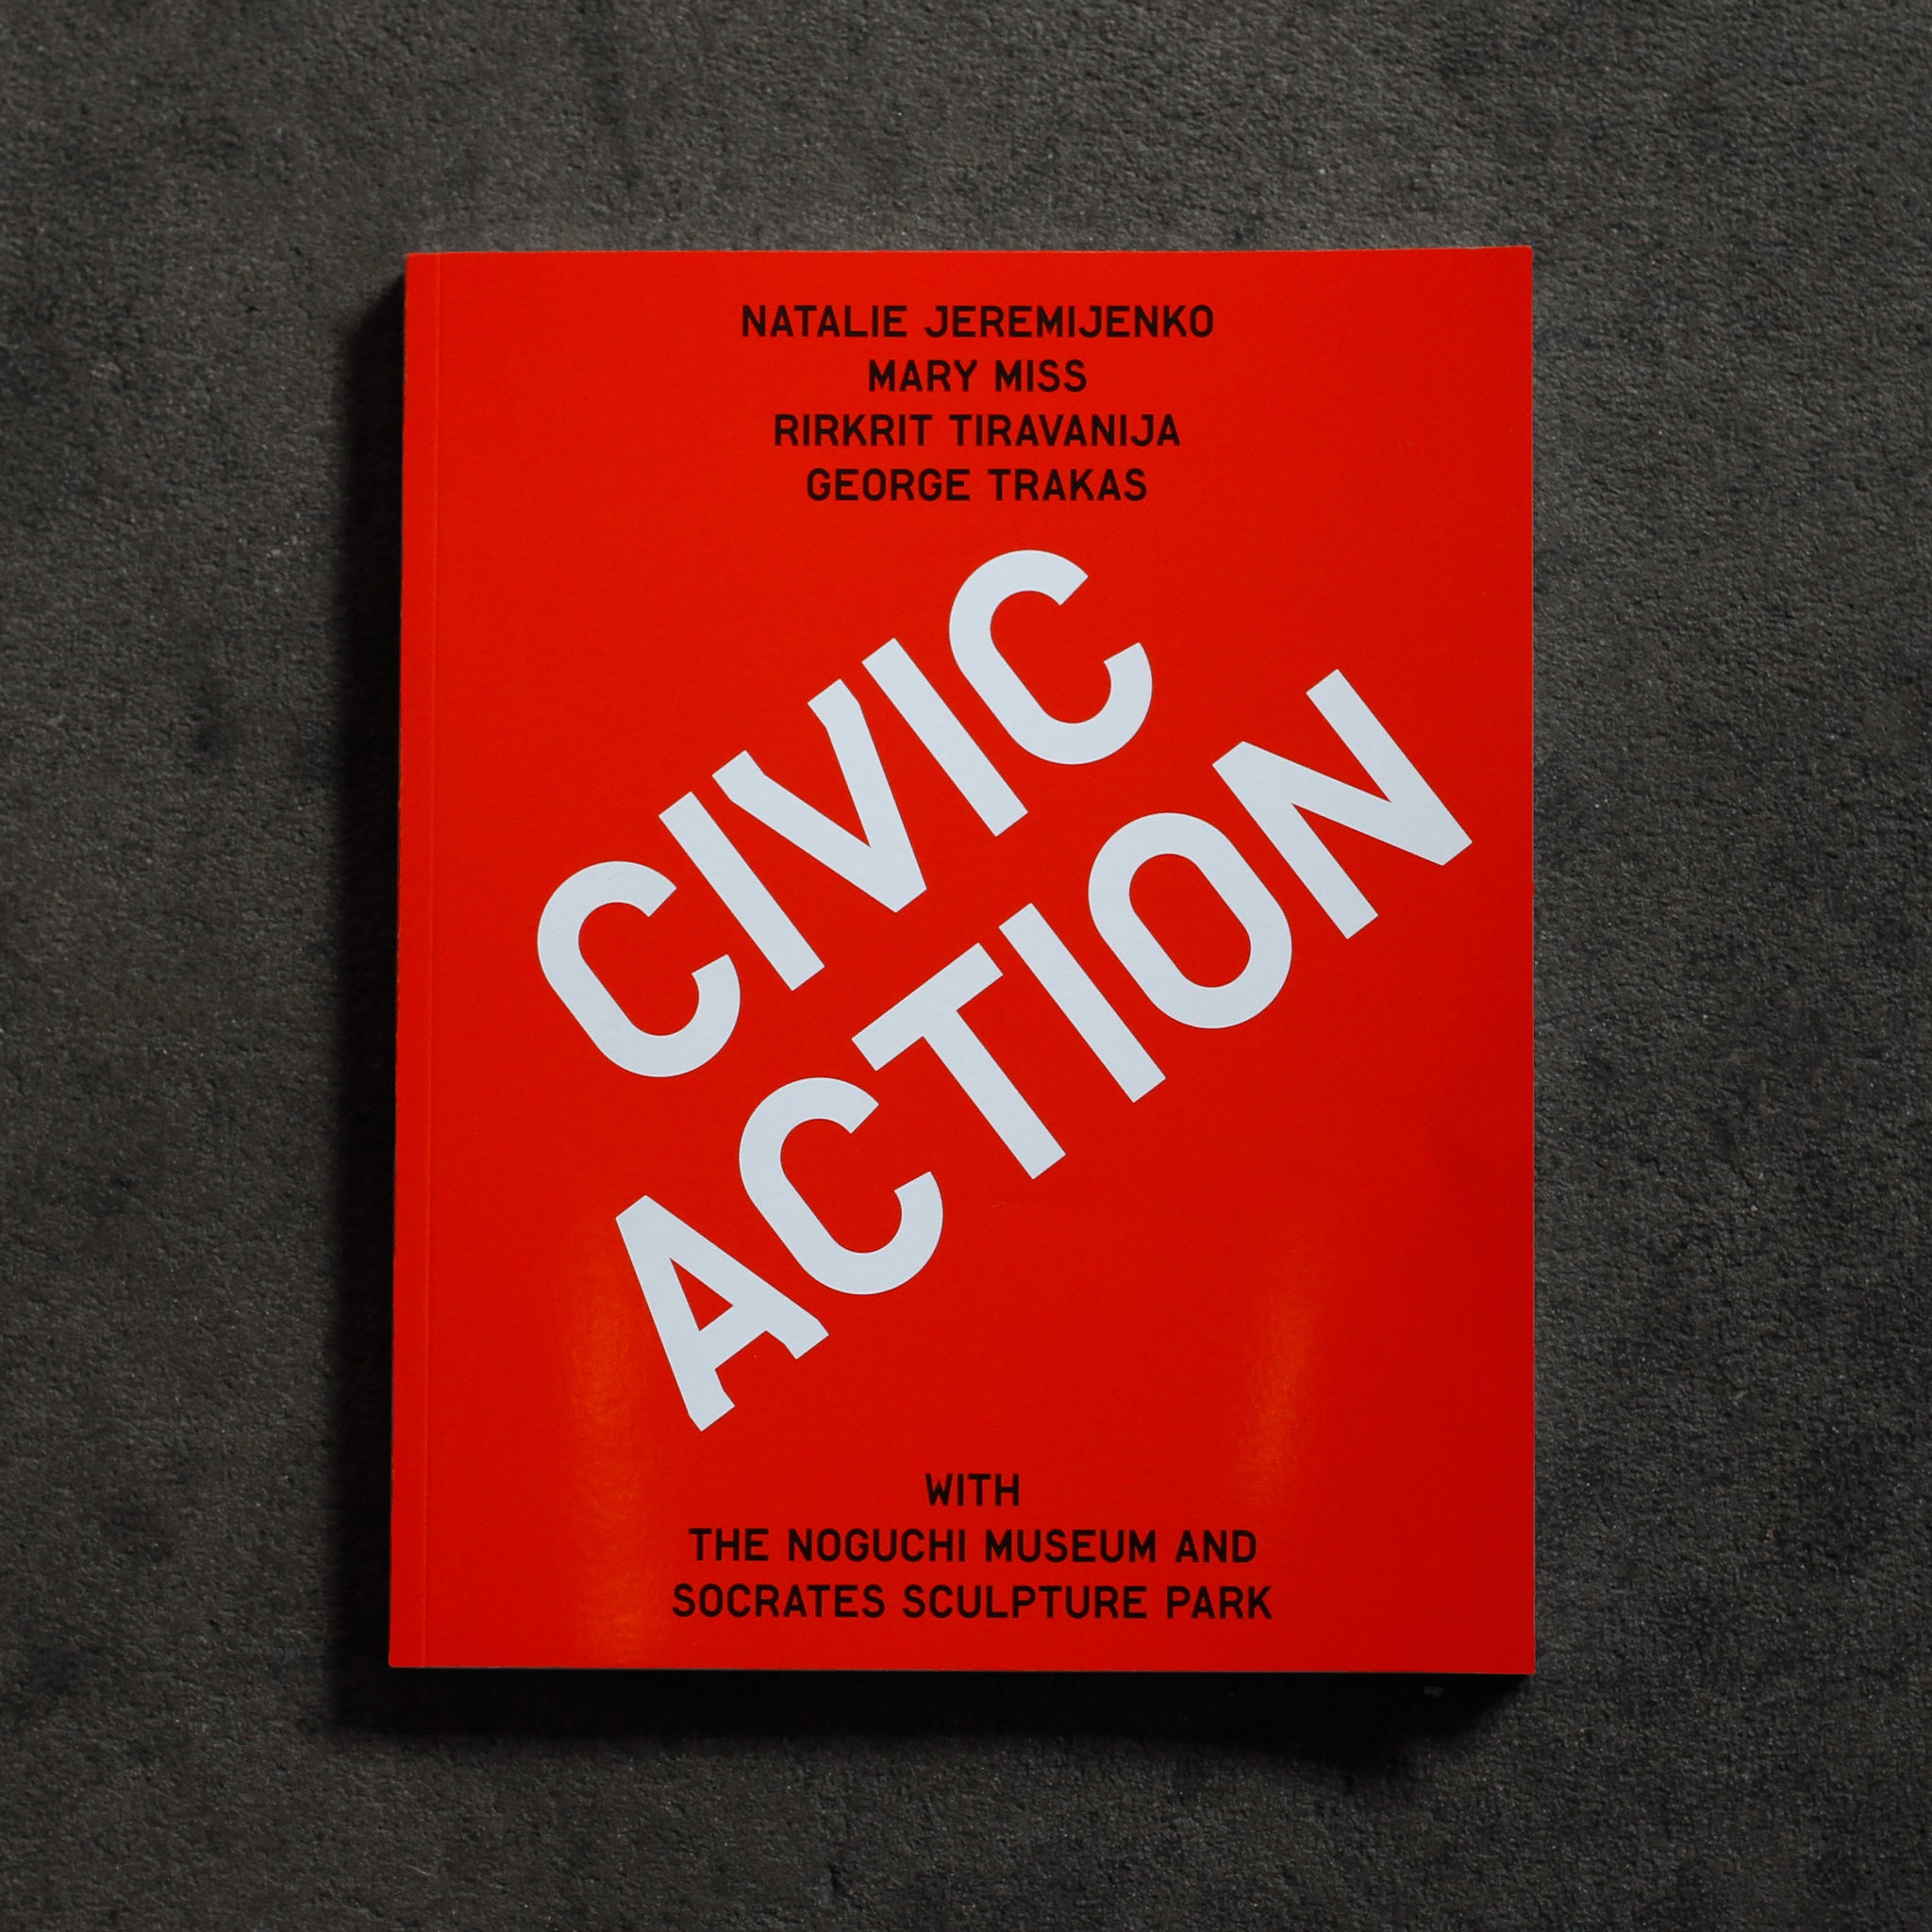 Cover of 'Civic Action,' a bright red-orange solid cover with large diagonal headline 'Civic Action' in white sans serif type, 'Natalie Jeremijenko, Mary Miss, Rikrit Tiravanija, George Trakas' in smaller centered black sans serif type at top and 'with The Noguchi Museum and Socrates Sculpture Park' in same black centered type at bottom